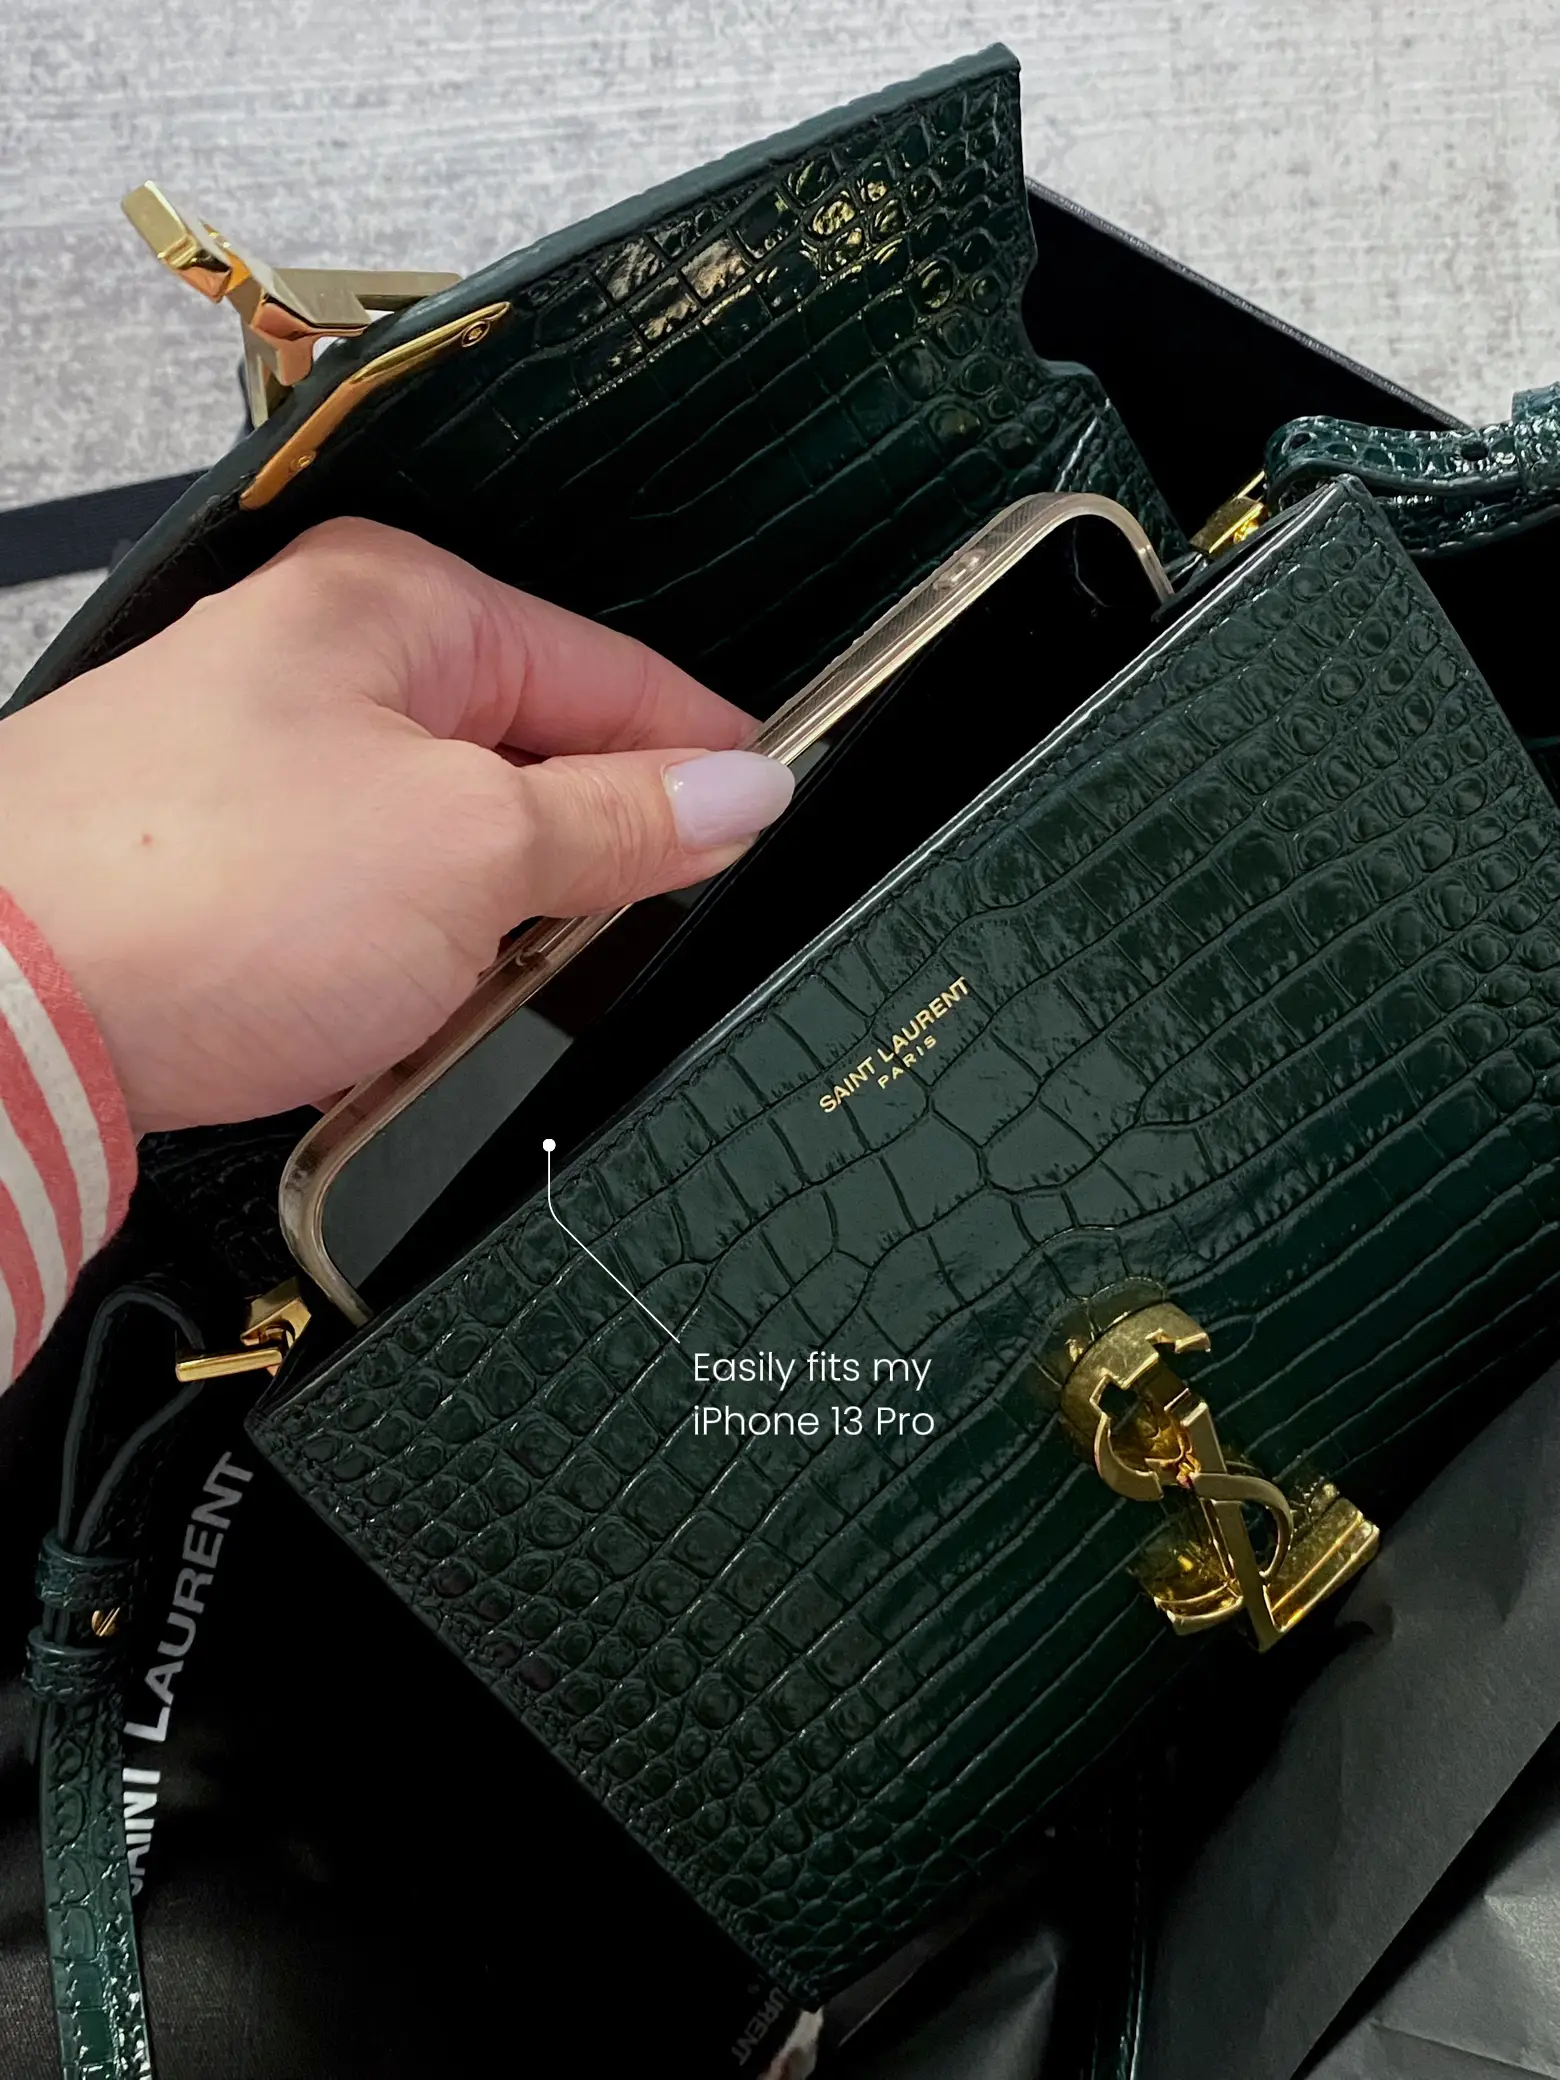 YSL MONOGRAM CHAIN WALLET UNBOXING + REVIEWS 